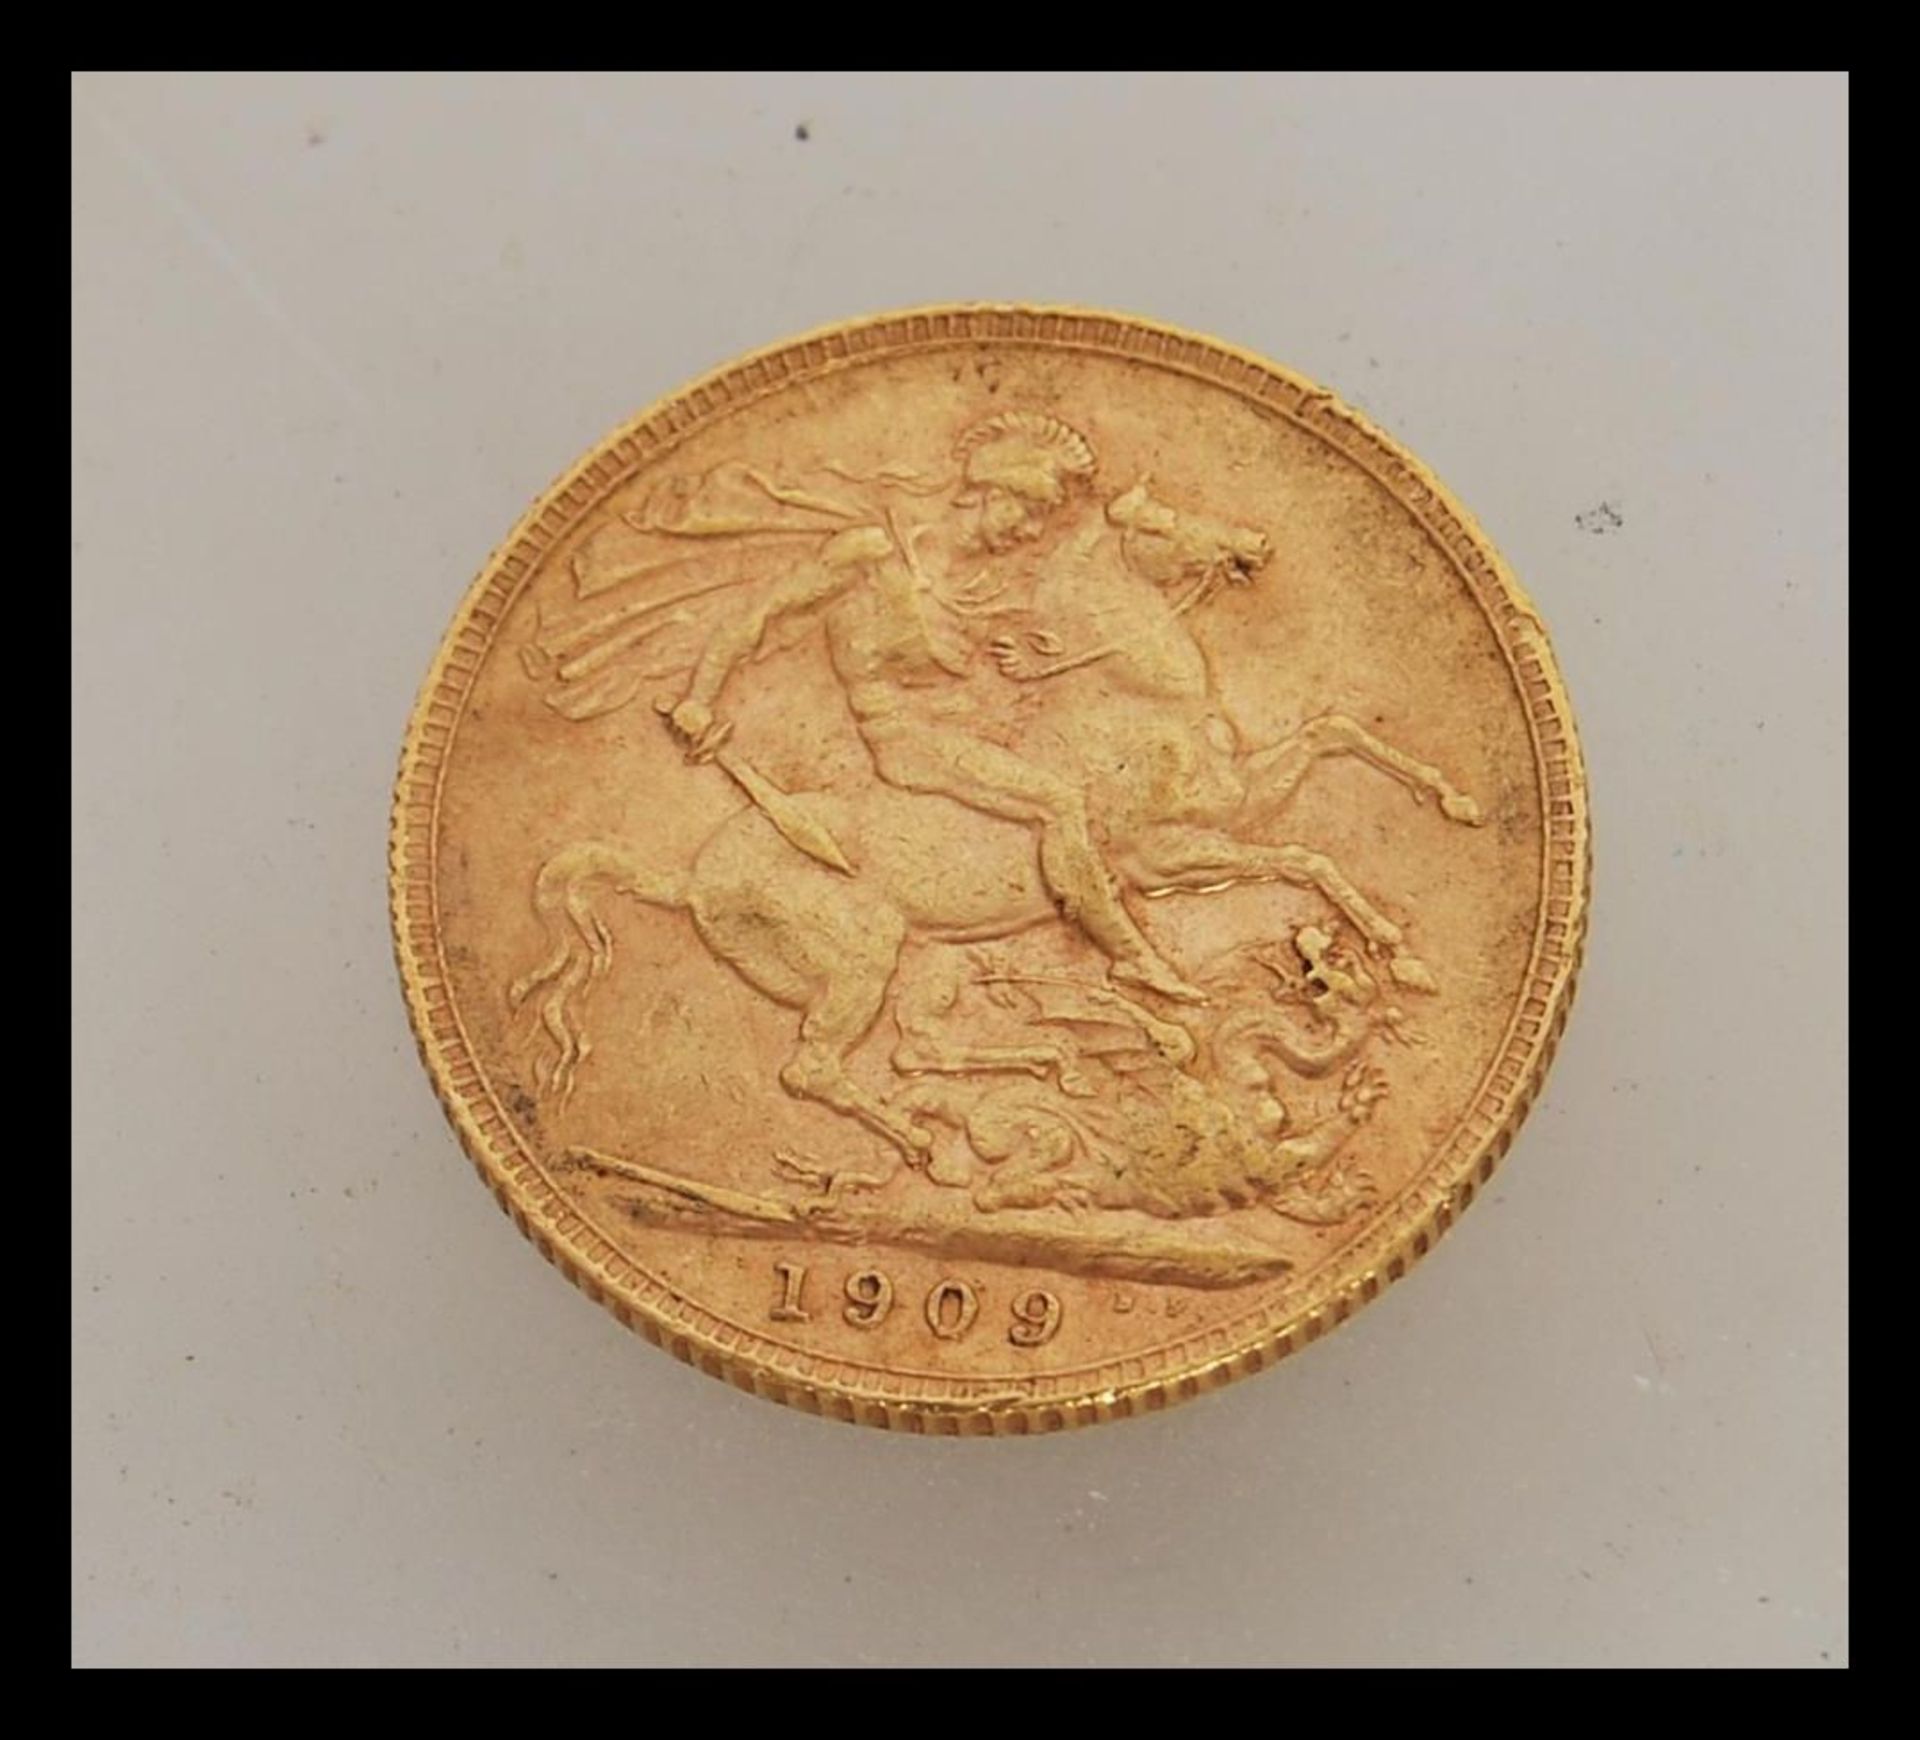 A 1909 Edward VII London mint full gold sovereign. Weight 8.0g. - Image 2 of 2